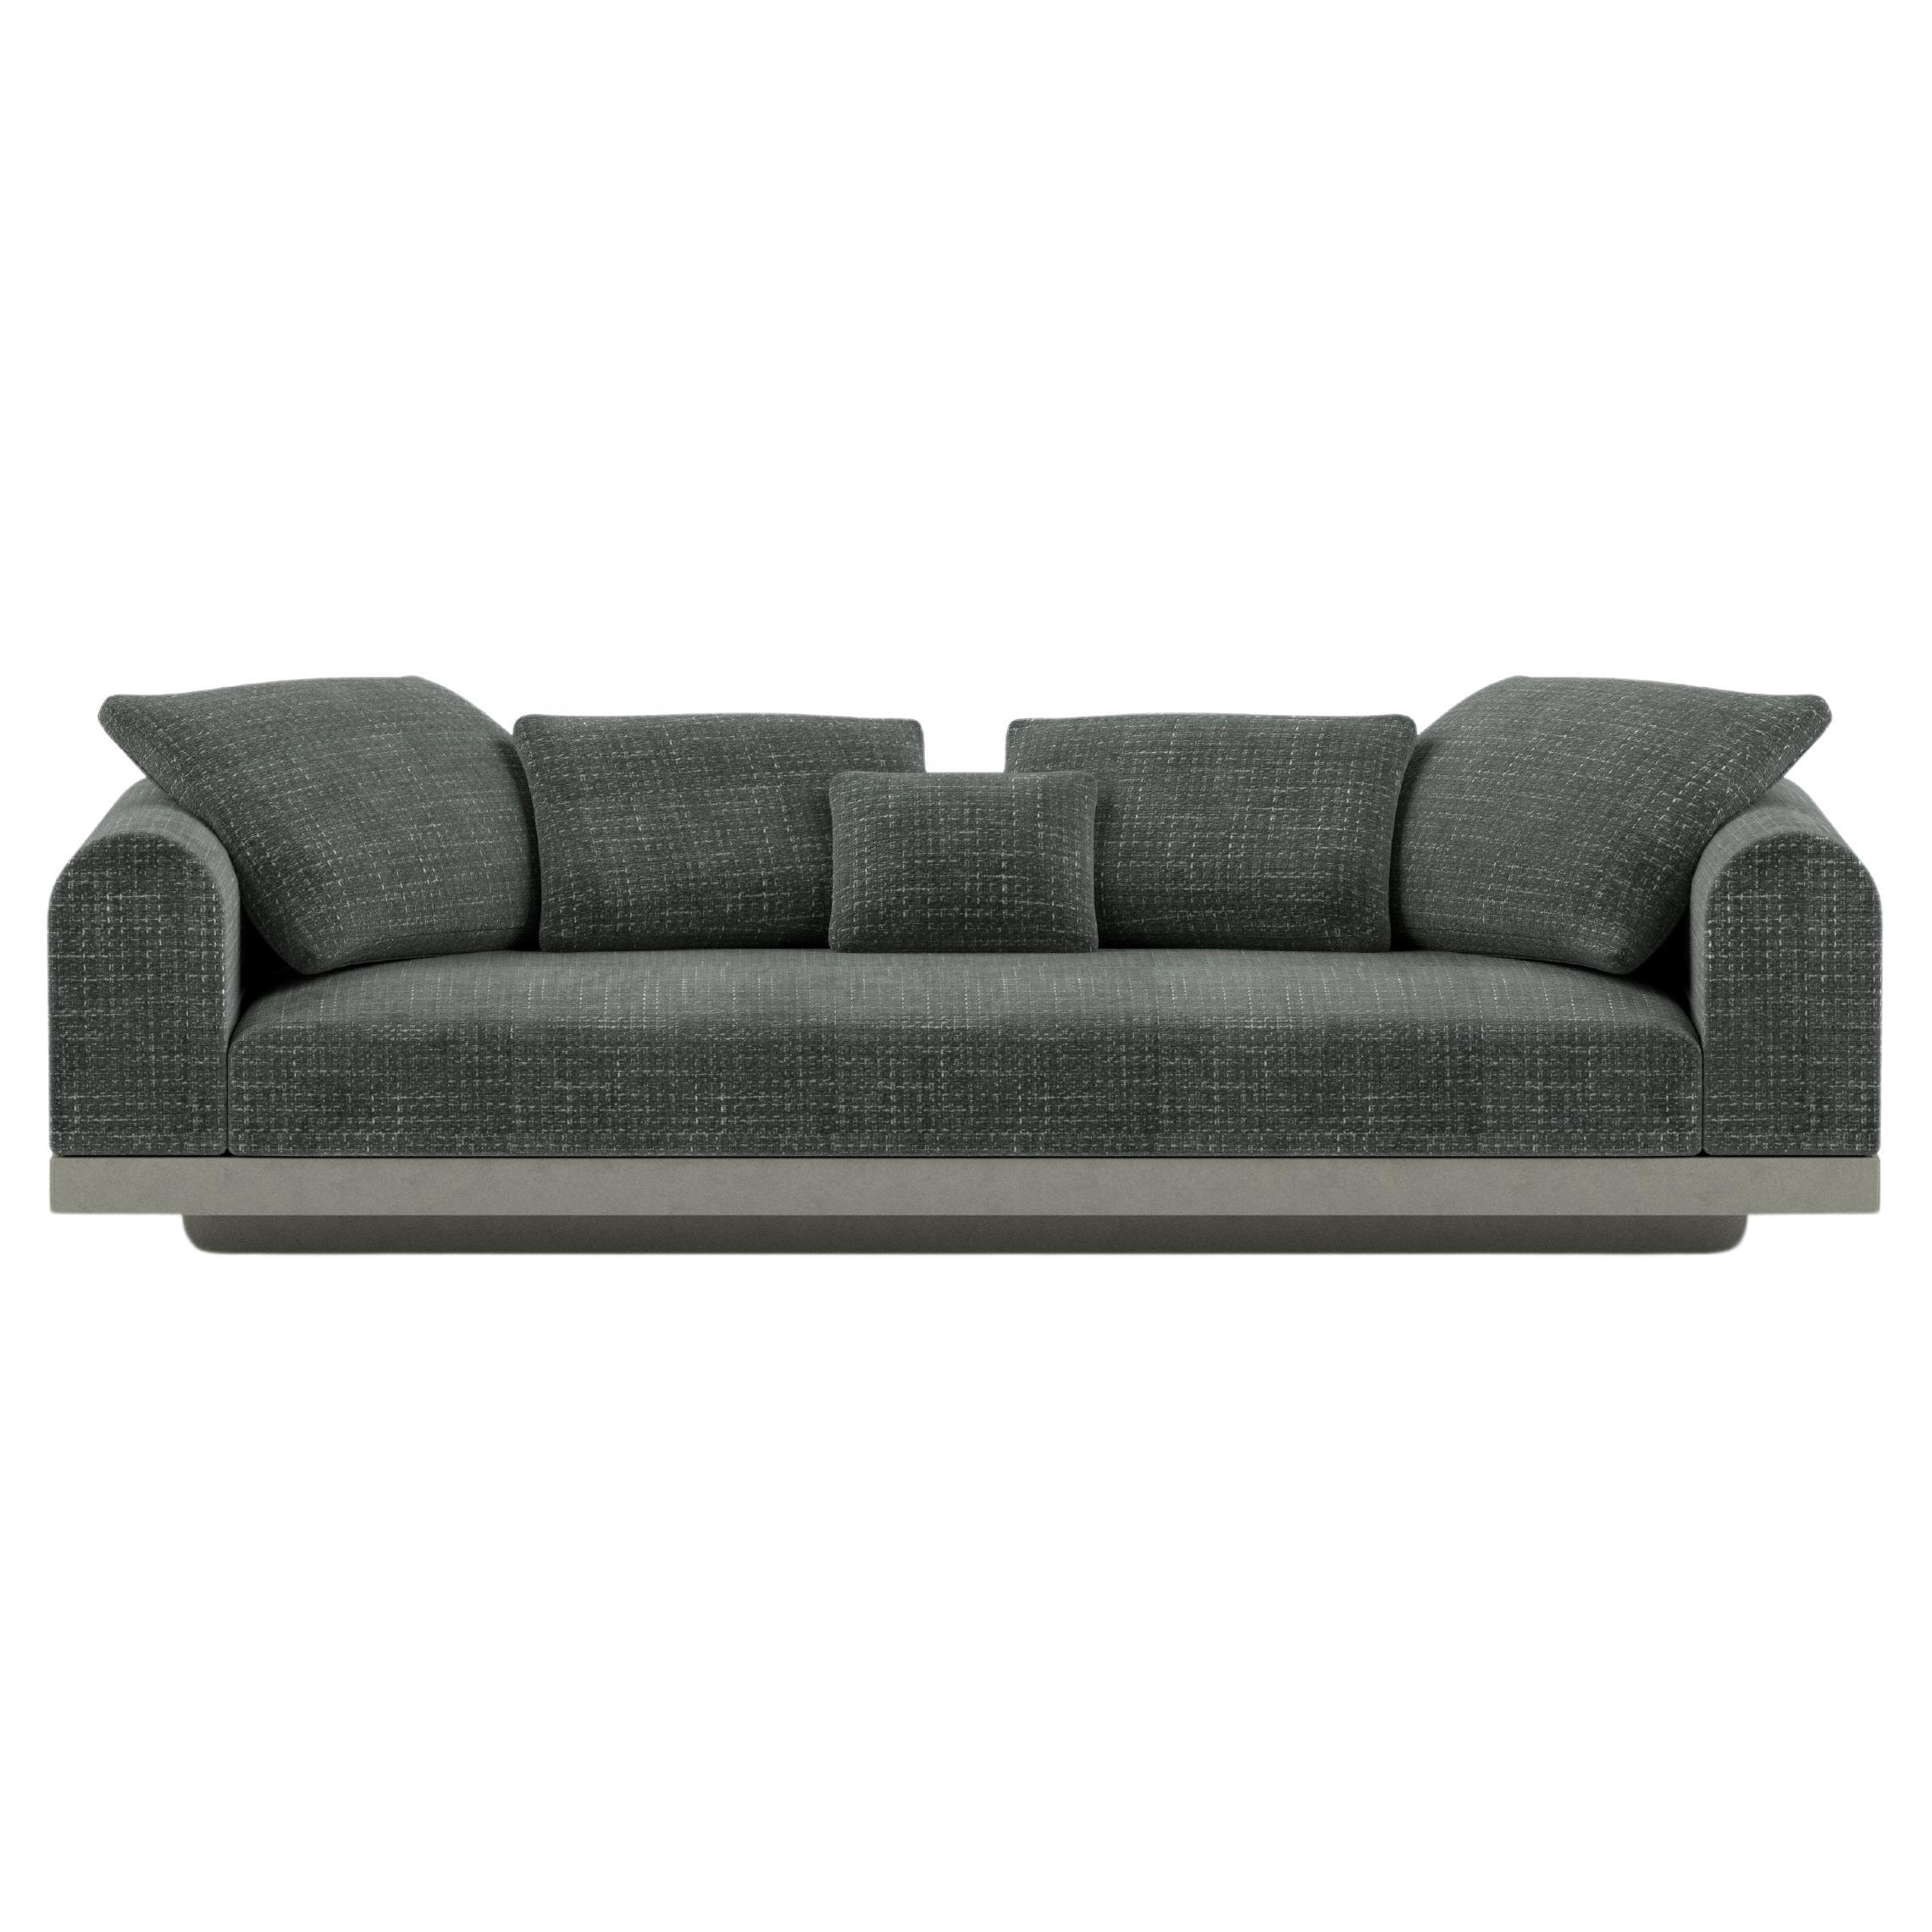 What is a small loveseat called?